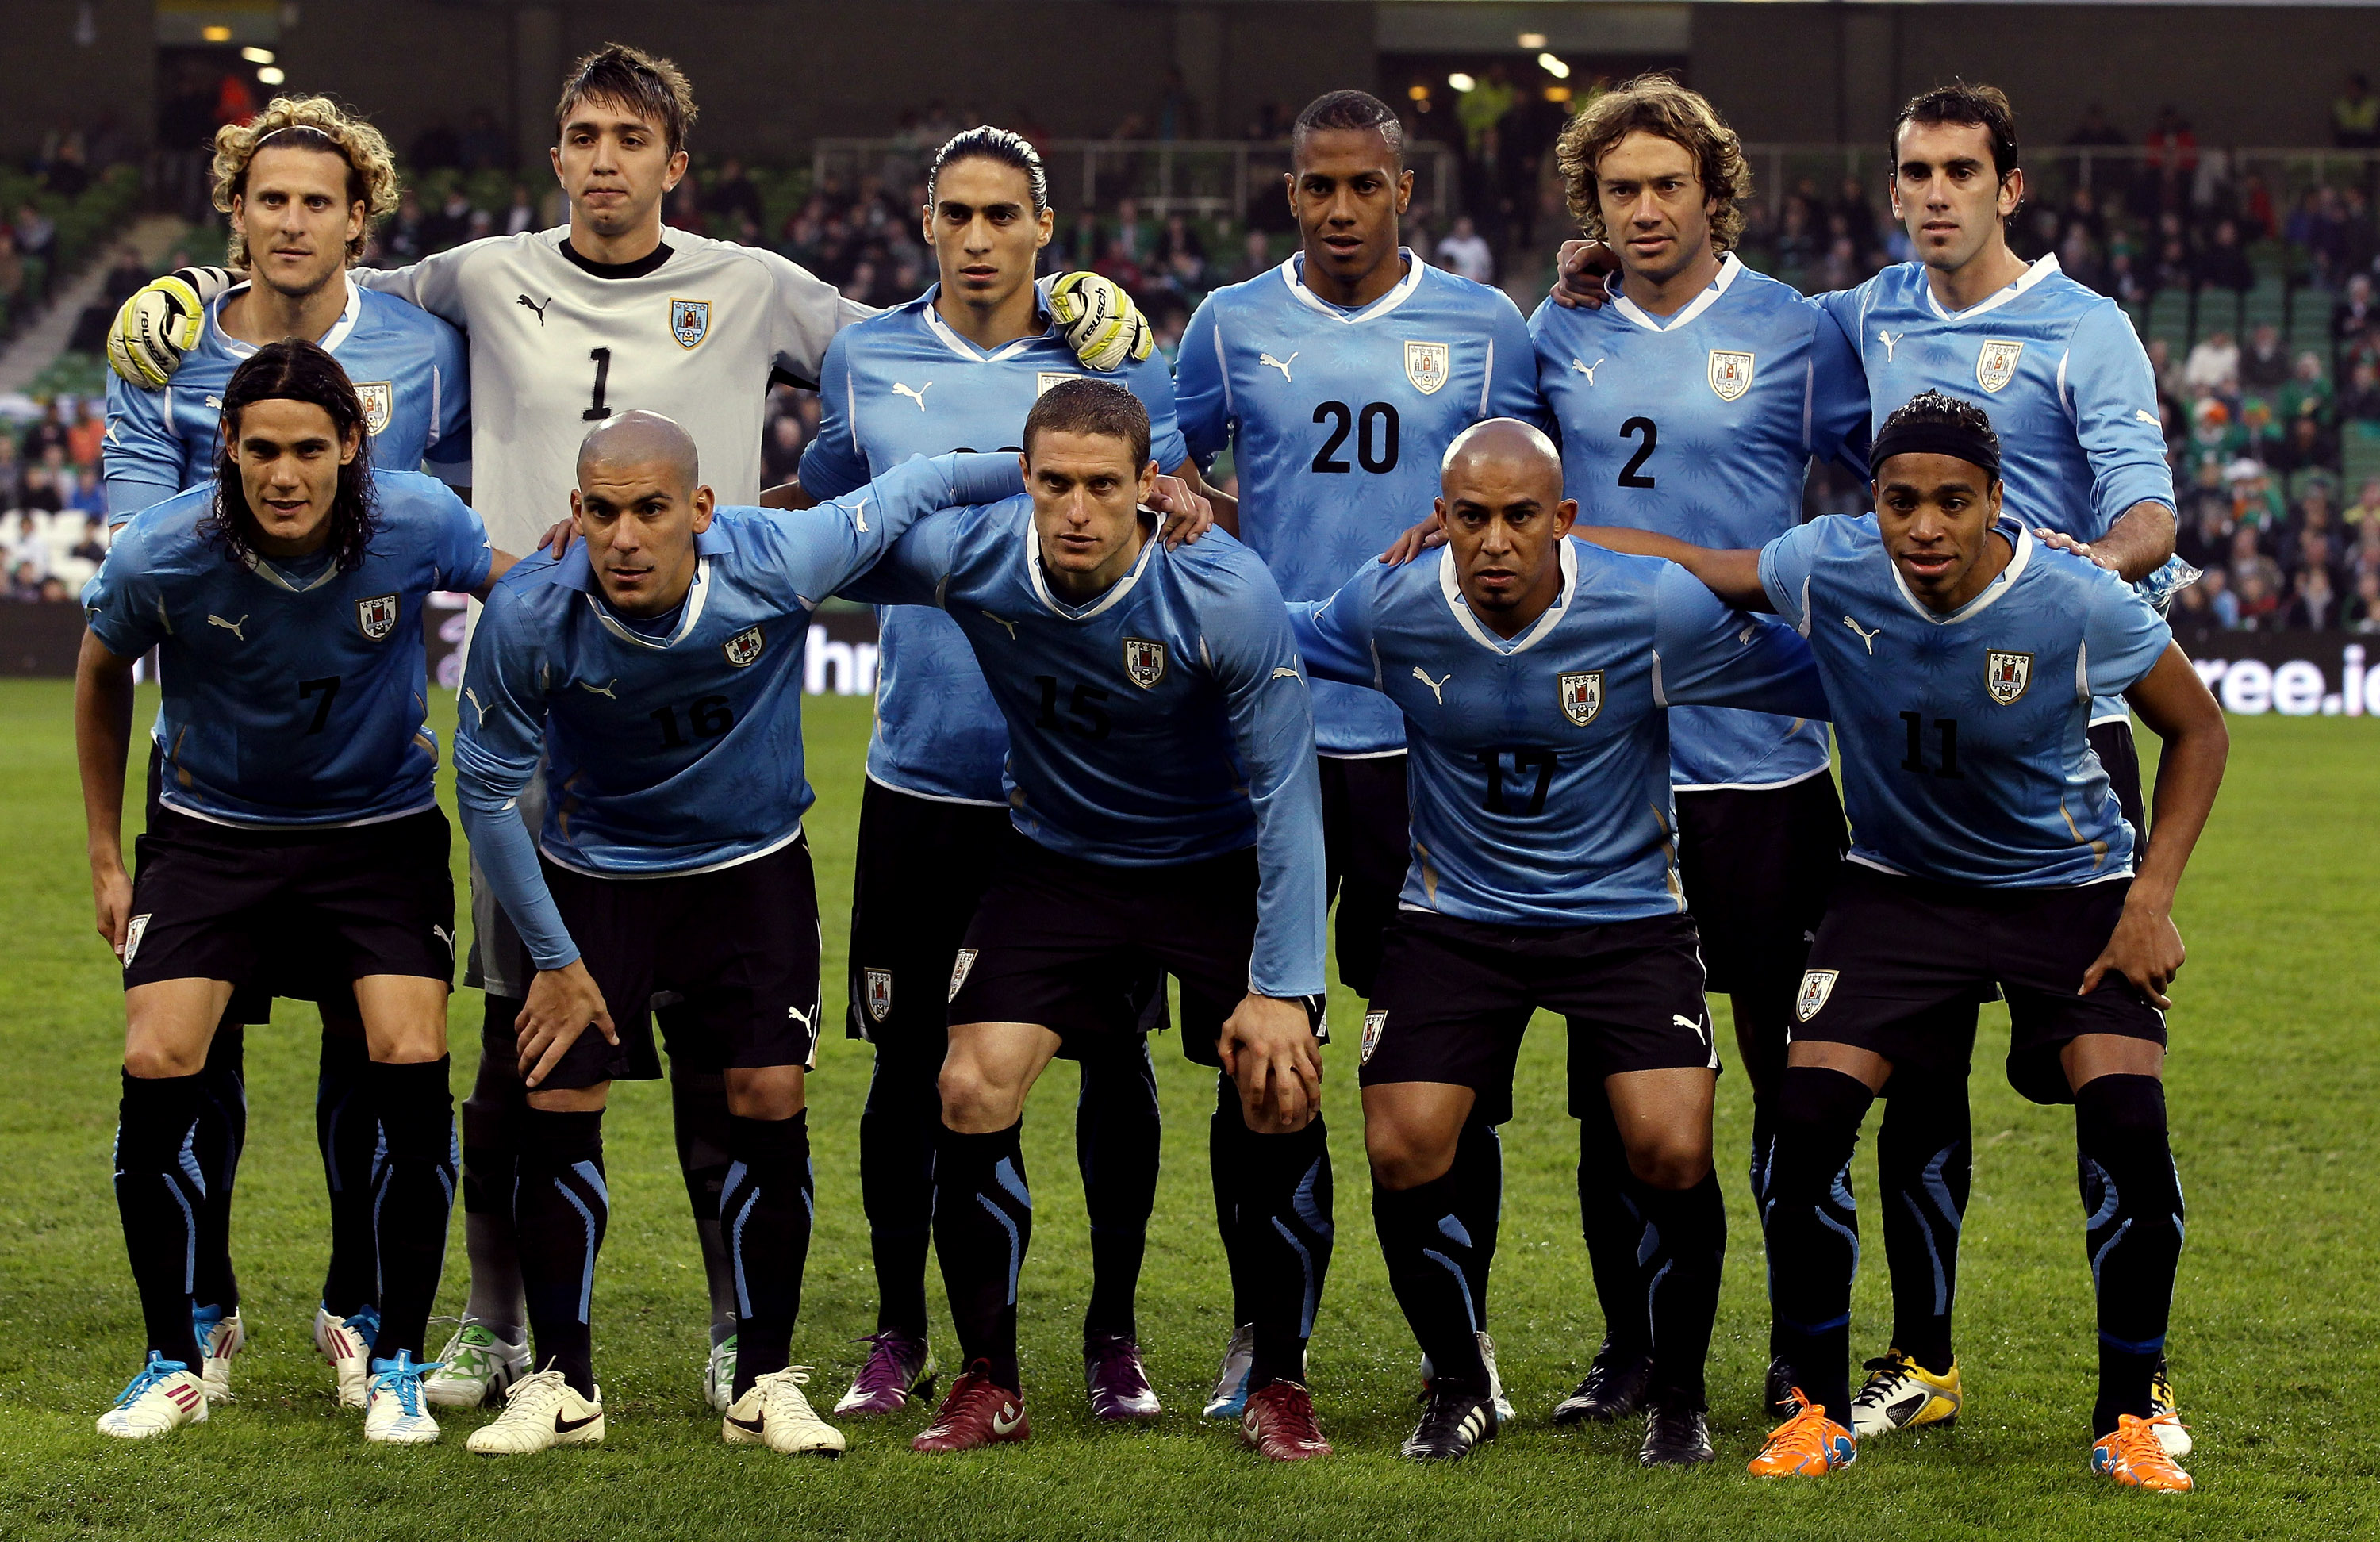 DUBLIN, IRELAND - MARCH 29:  Uruguay team line up for a team photo during the International Friendly match between Republic of Ireland and Uruguay at the Aviva Stadium on March 29, 2011 in Dublin, Ireland.  (Photo by Ian Walton/Getty Images)